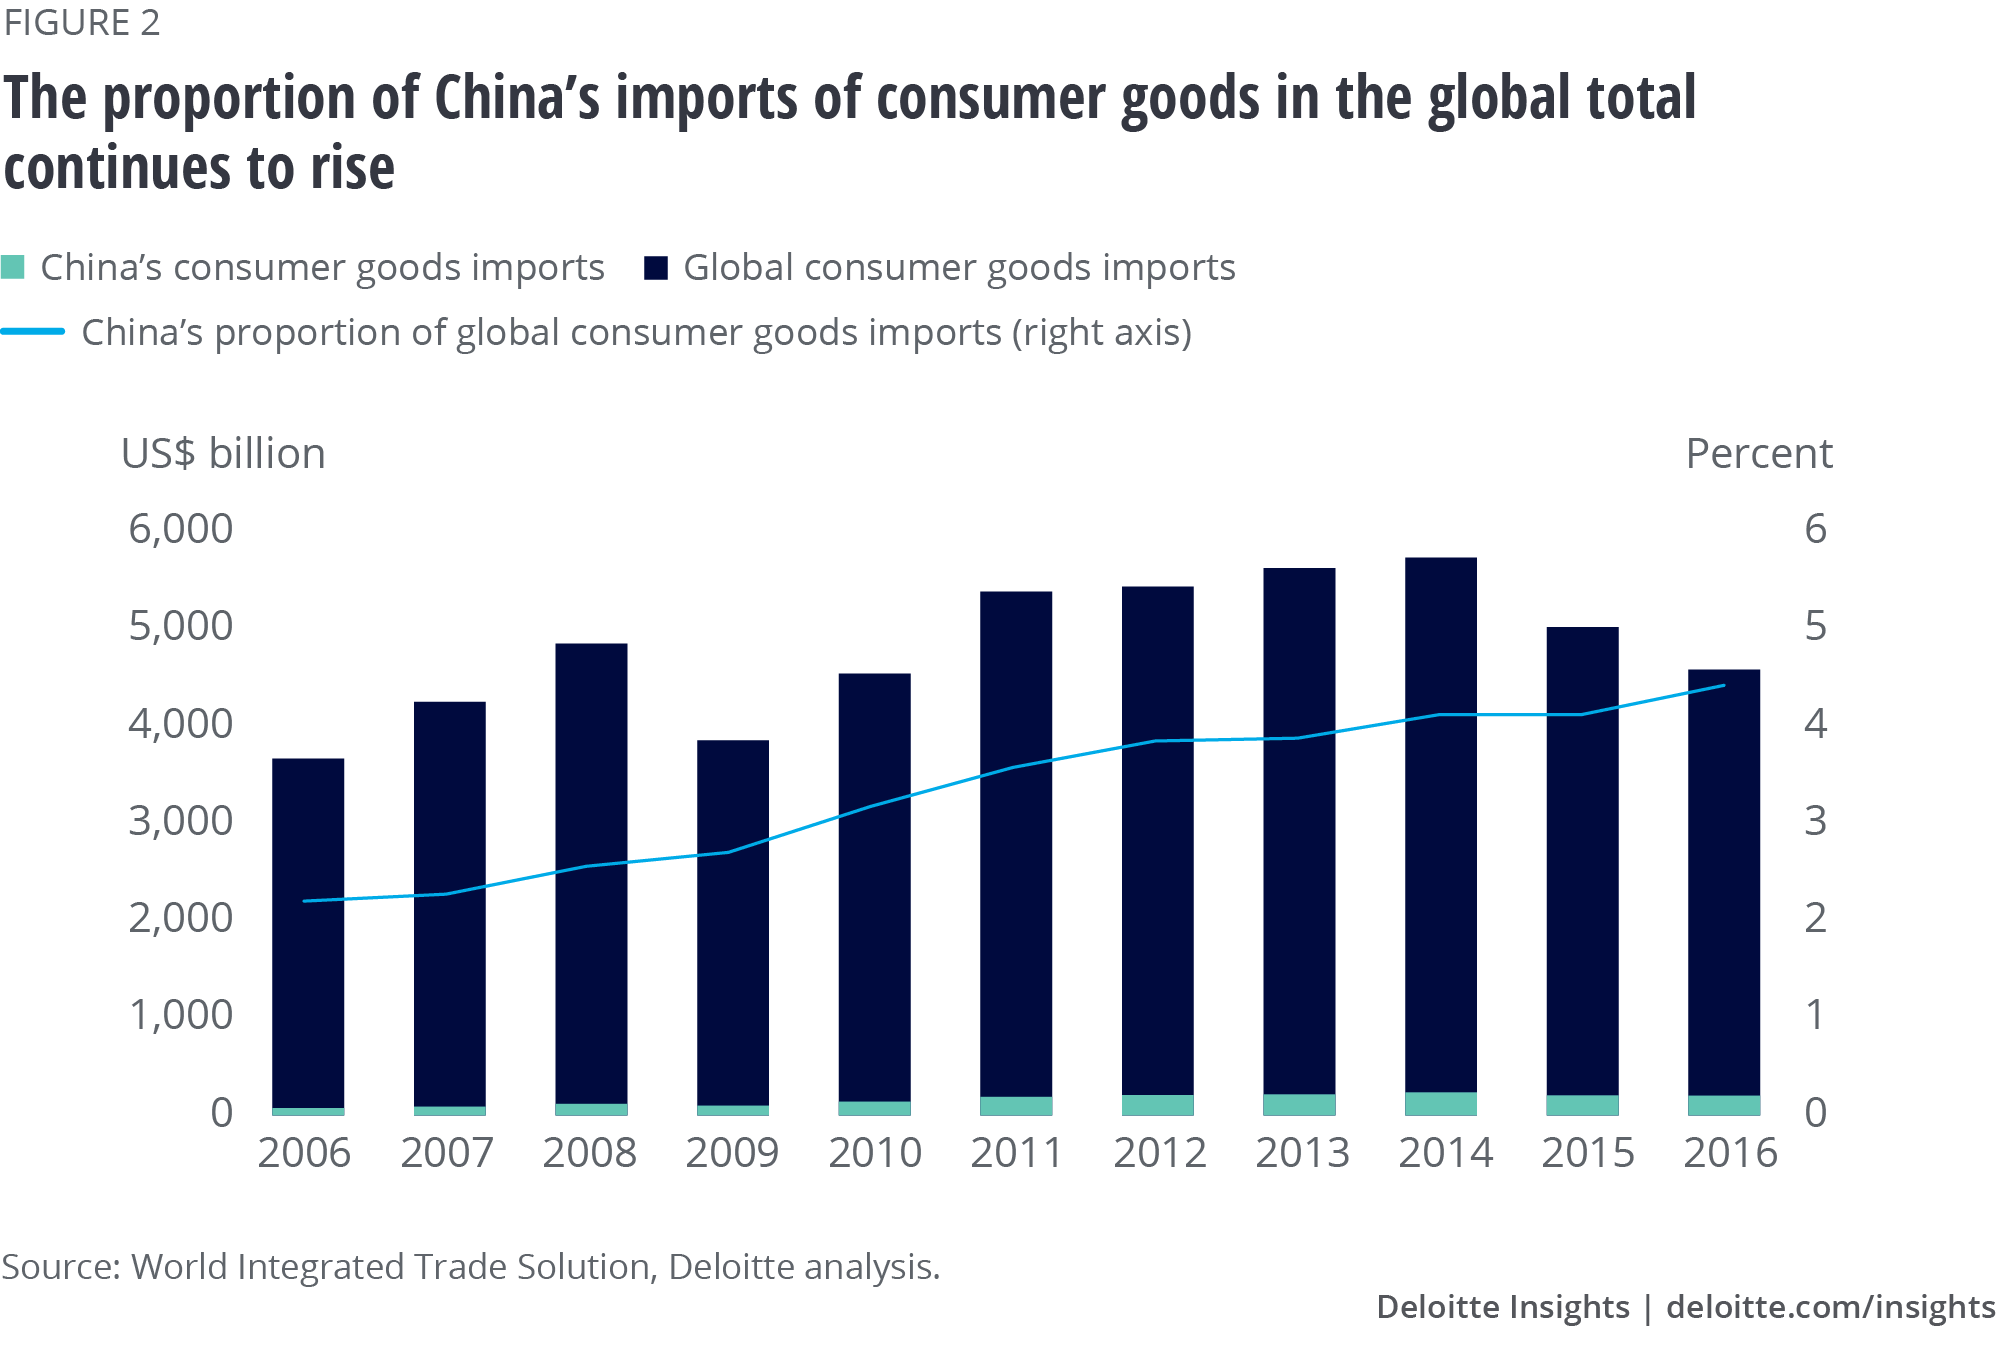 The proportion of China’s imports of consumer goods in the global total continues to rise